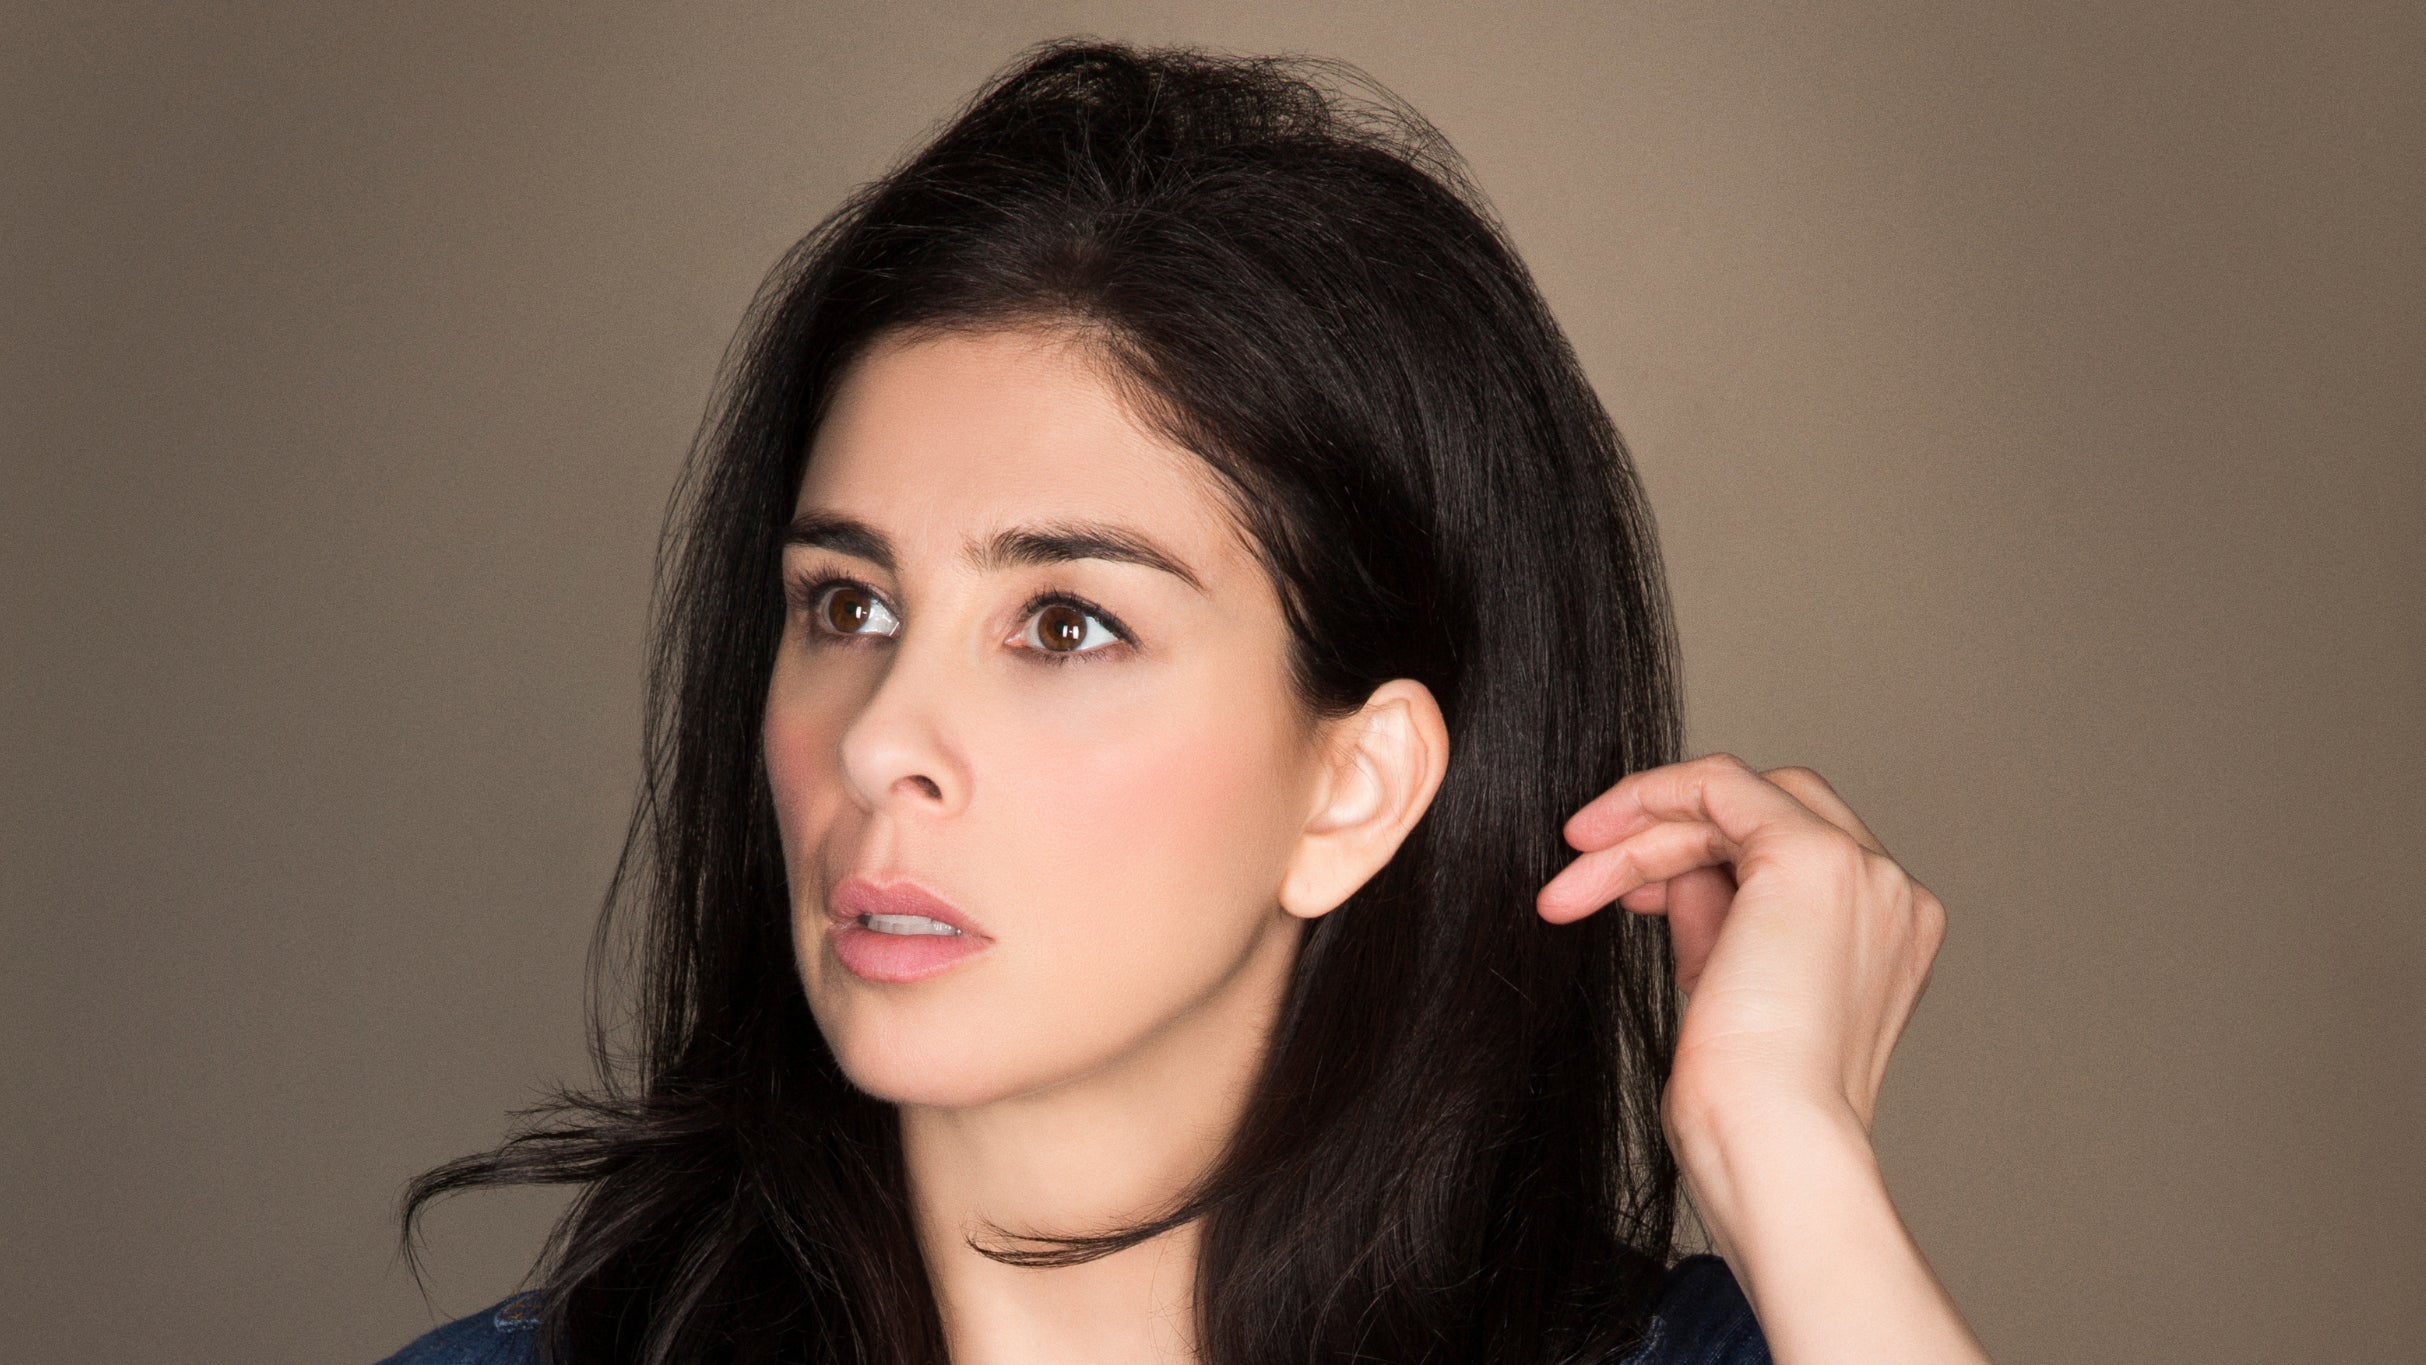 Netflix Is A Joke Presents: Sarah Silverman in Hollywood promo photo for Countdown  presale offer code